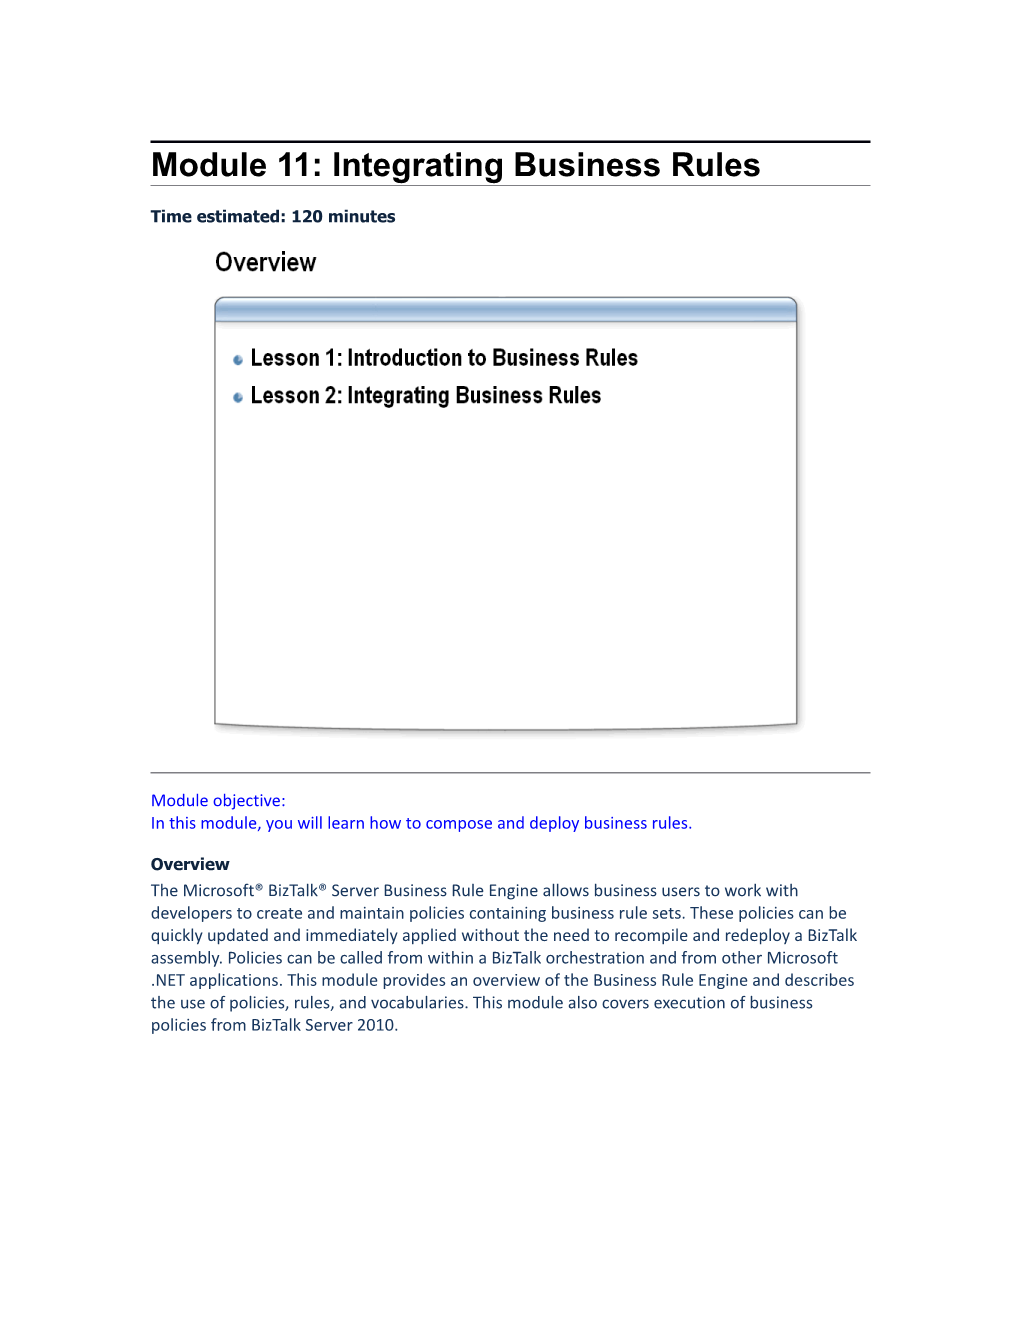 Module 11: Integrating Business Rules